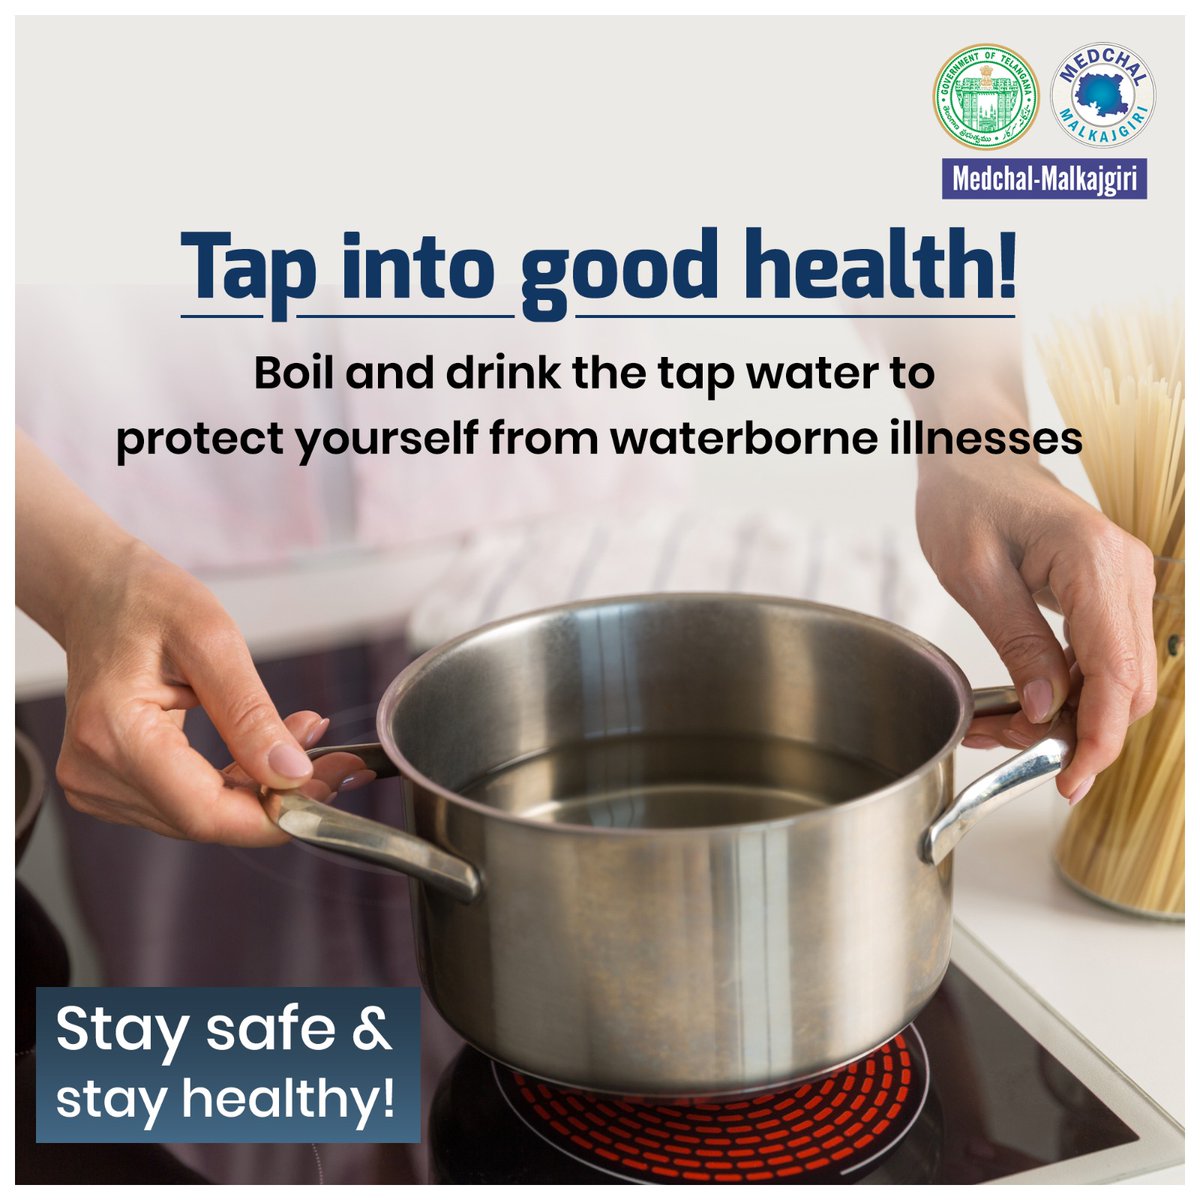 Tap into good health! Boil and drink the tap water to protect yourself from waterborne illnesses. Stay safe & stay healthy! #MedchalMalkajgiri @KTRBRS @arvindkumar_ias @AmoyKumarIAS @cdmatelangana #BoilDrinkingWater